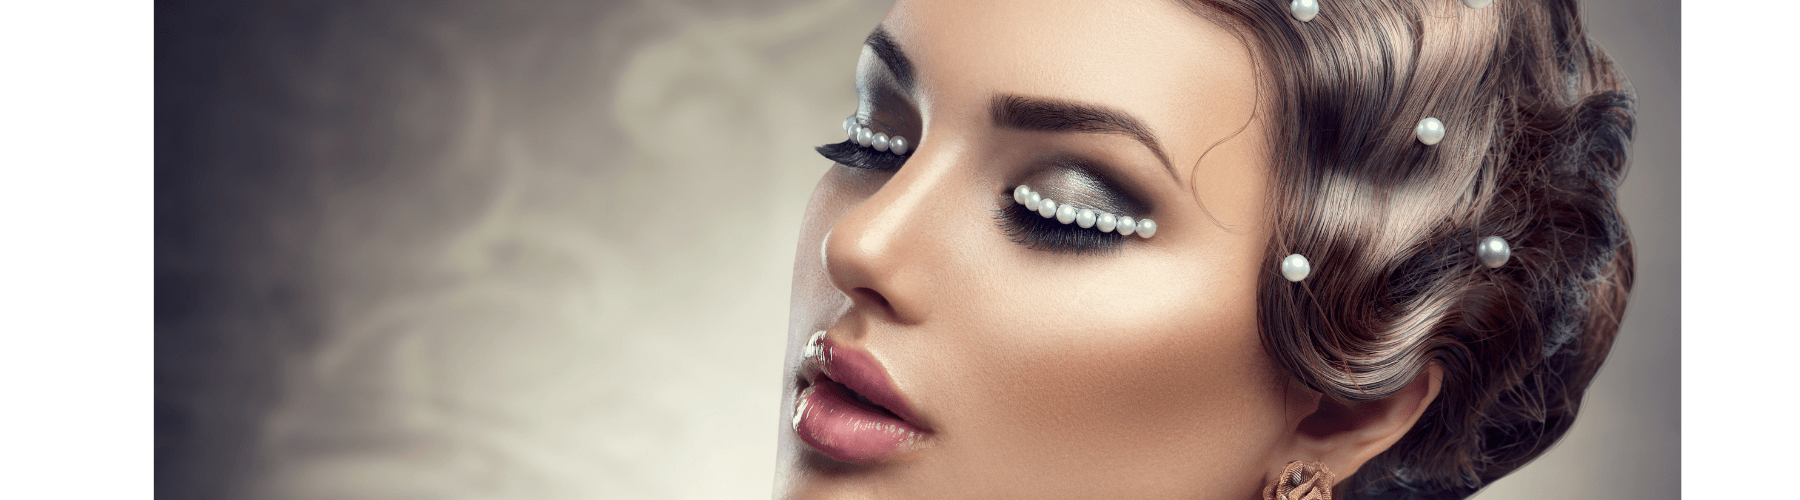 Lash Trends 2023: A Look at What's Hot and What's Not in the World of Mesmerizing Lashes - HUR BEAUTY